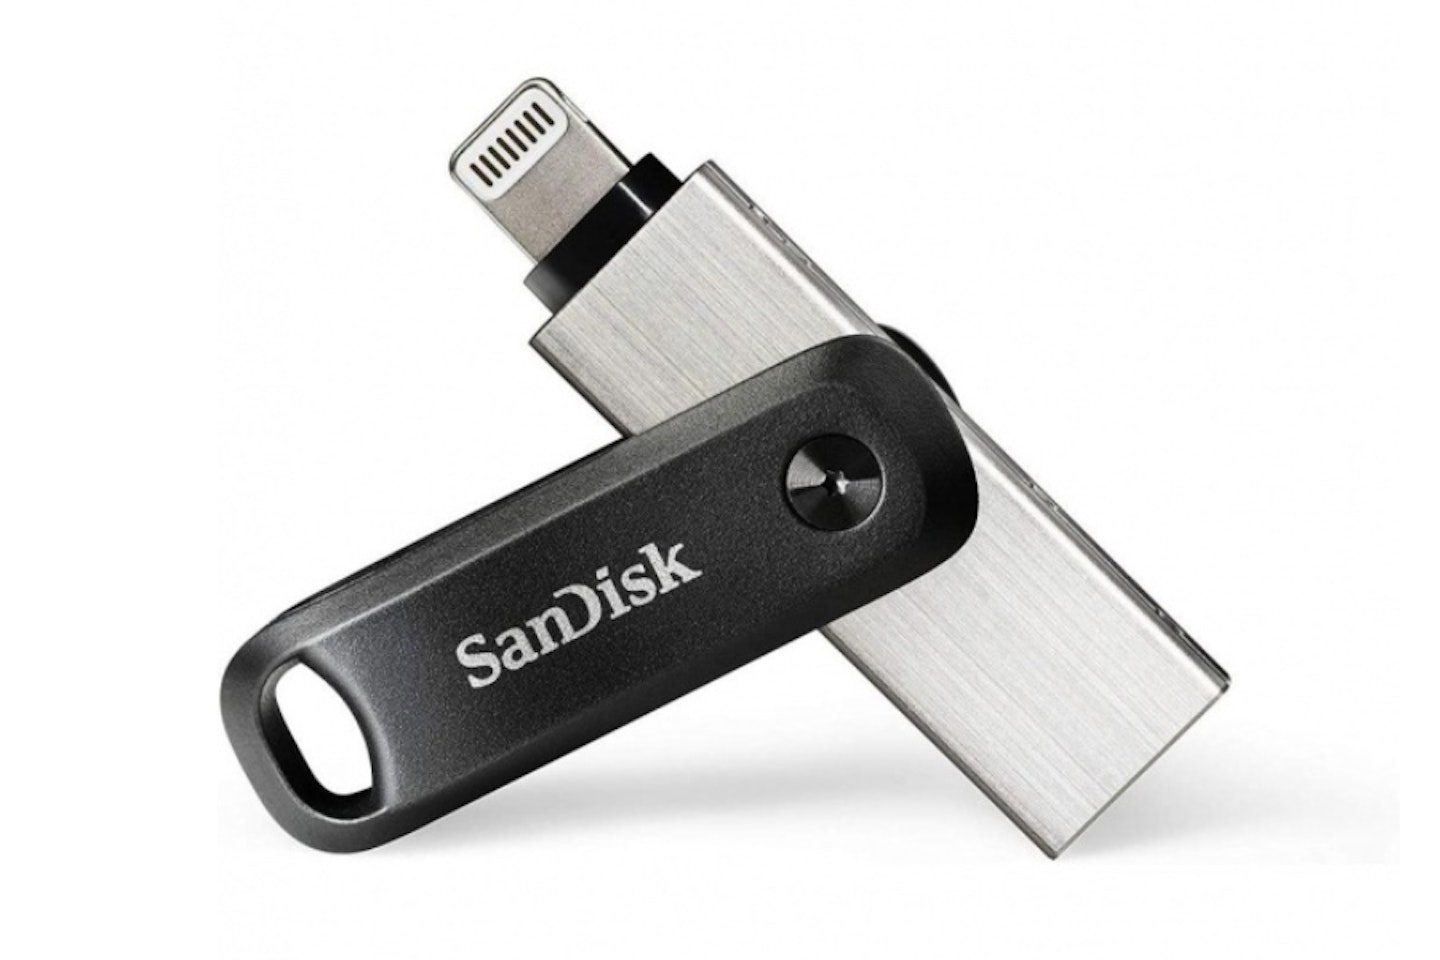 SanDisk 128GB iXpand Flash Drive Go with Lightning and USB 3.0 connectors-A Flash Drive- one of the best SanDisk USB stick devices